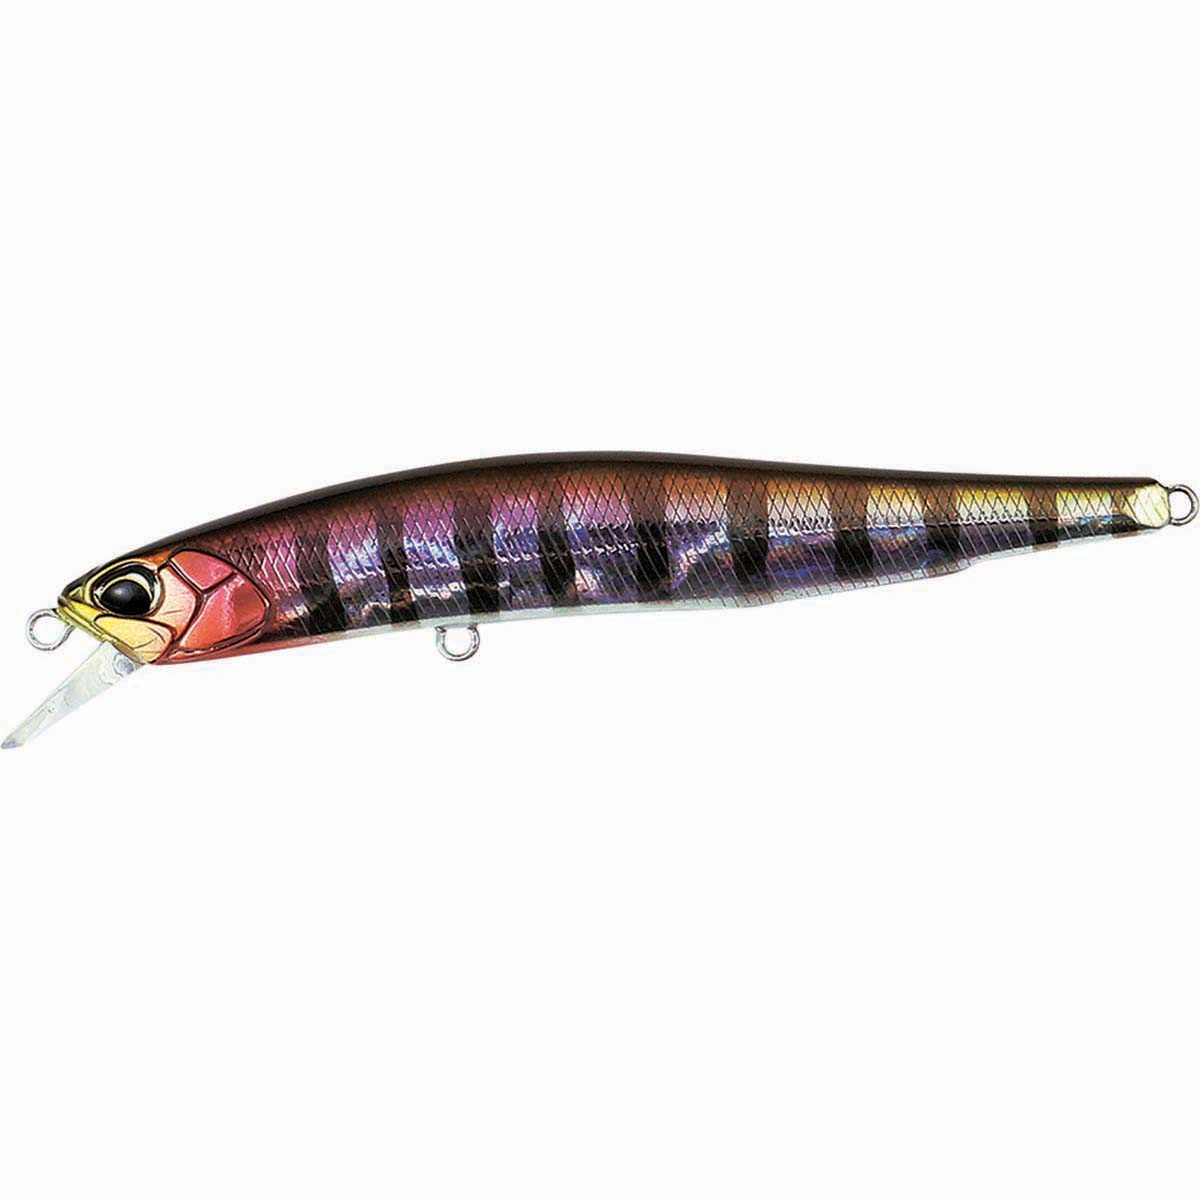 Duo Realis Minnow 8cm Lure Prism Gill